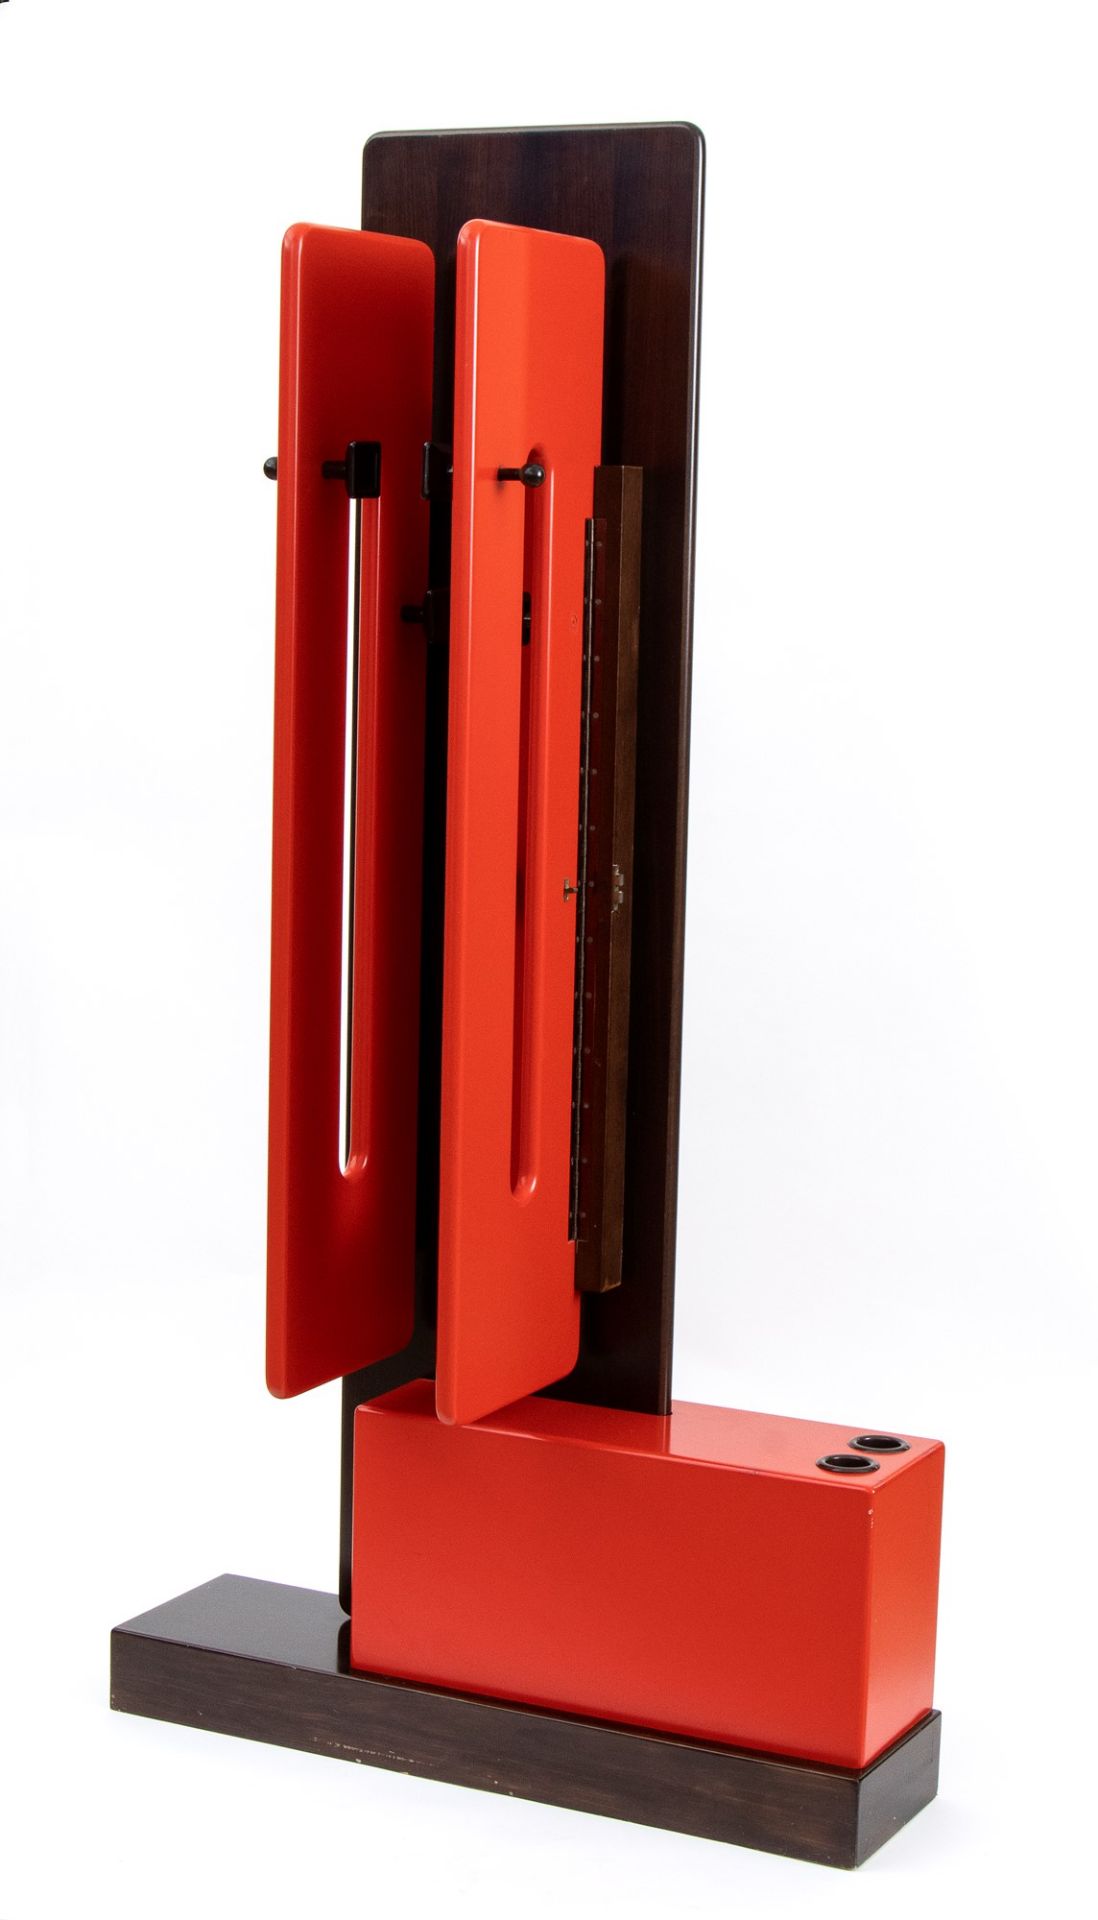 Luigi Sormani 1932-2017 Space Age. Coat hanger with elements in red lacquered wood. - Image 6 of 8